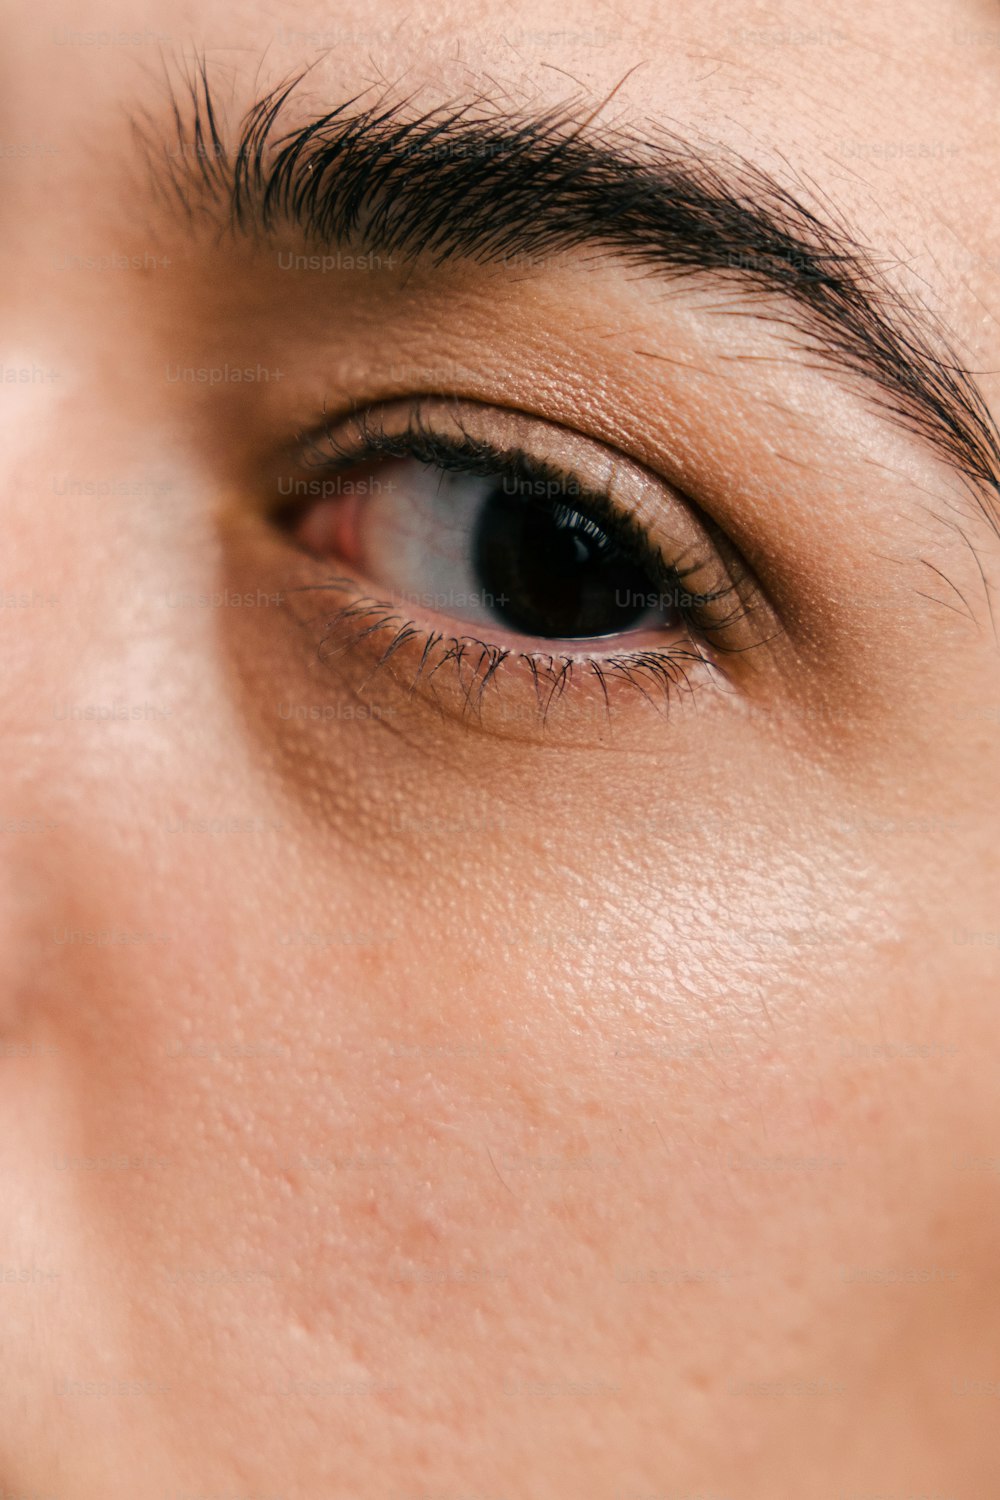 a close up of a person's eye with a cell phone in the background